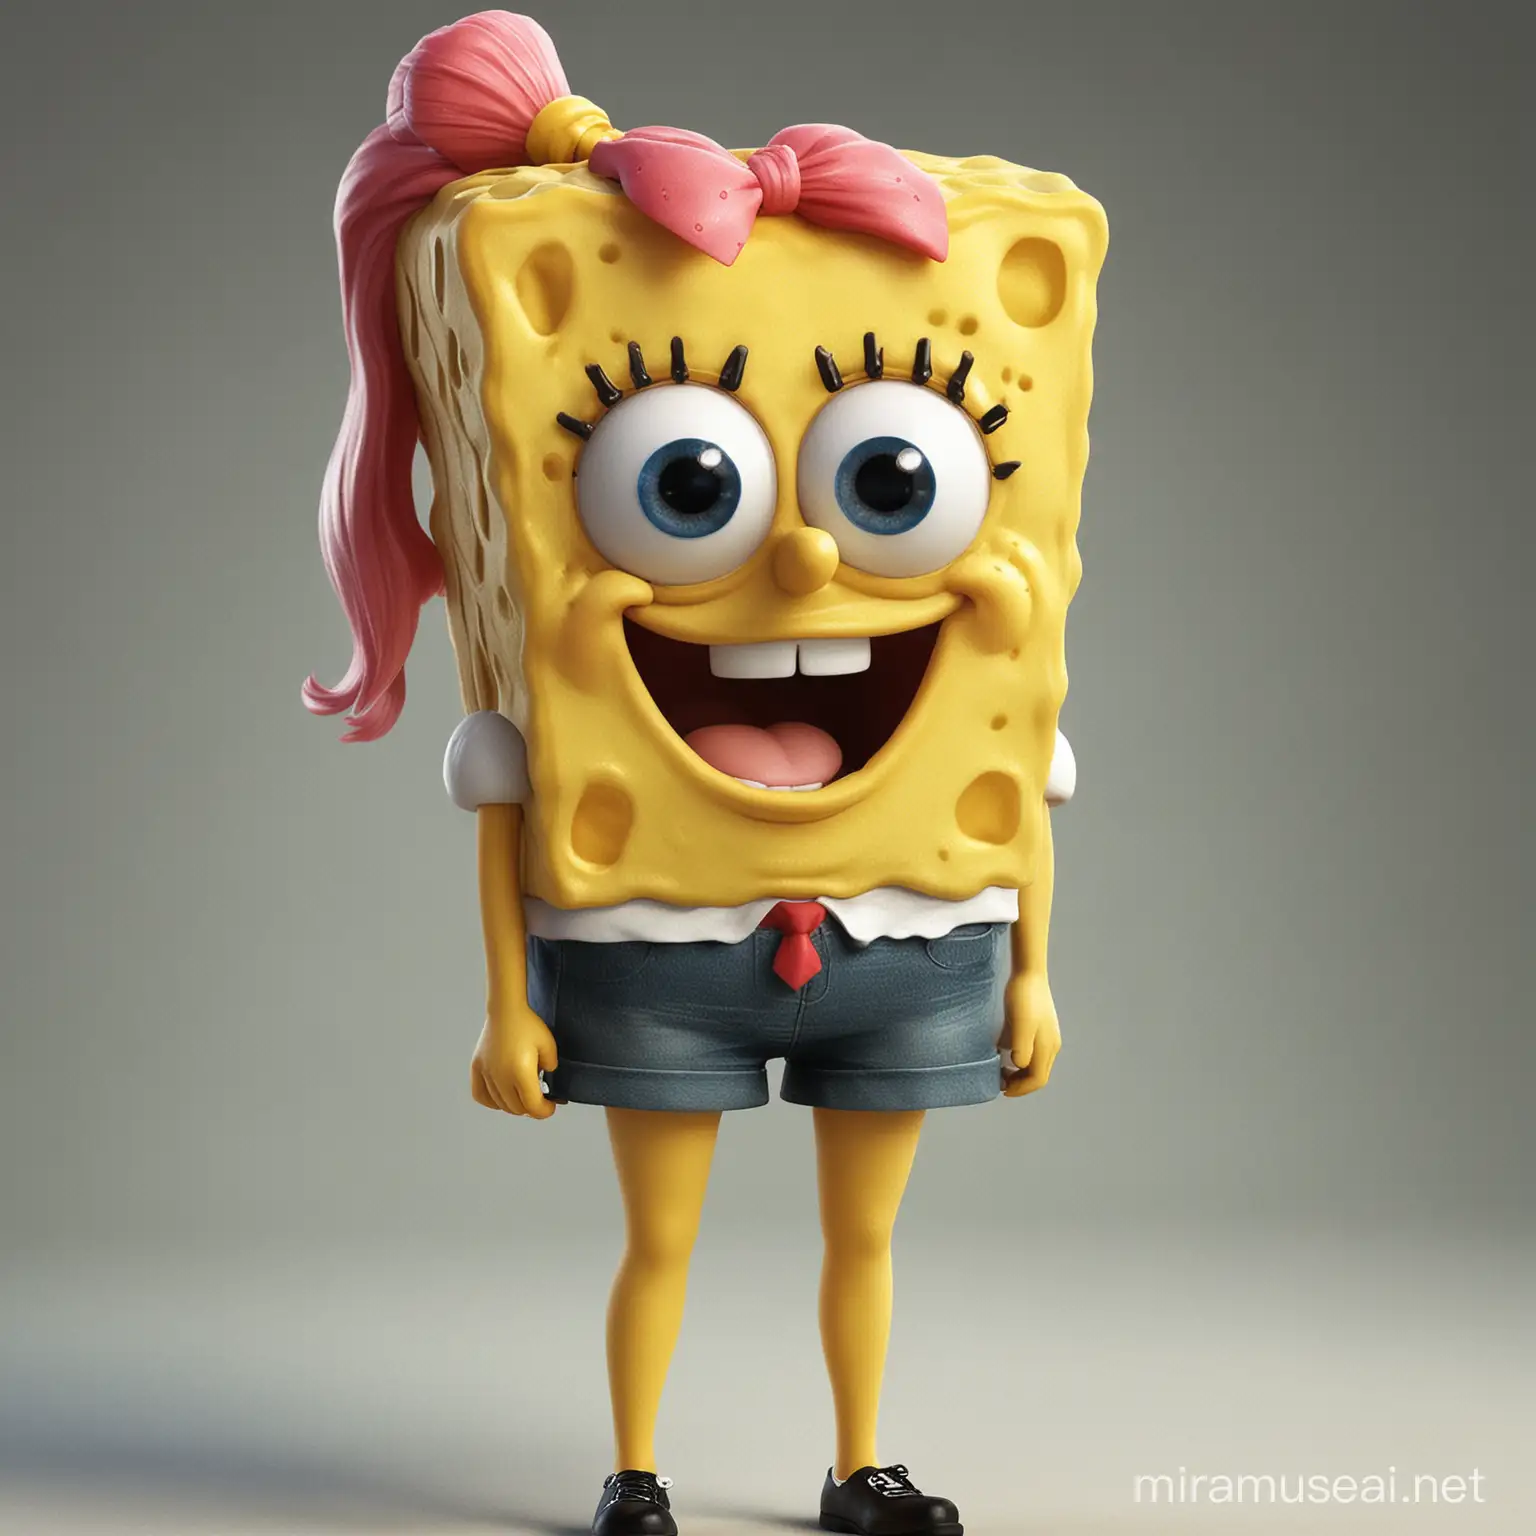 SpongeBob GenderSwapped as a Playful Girl Character